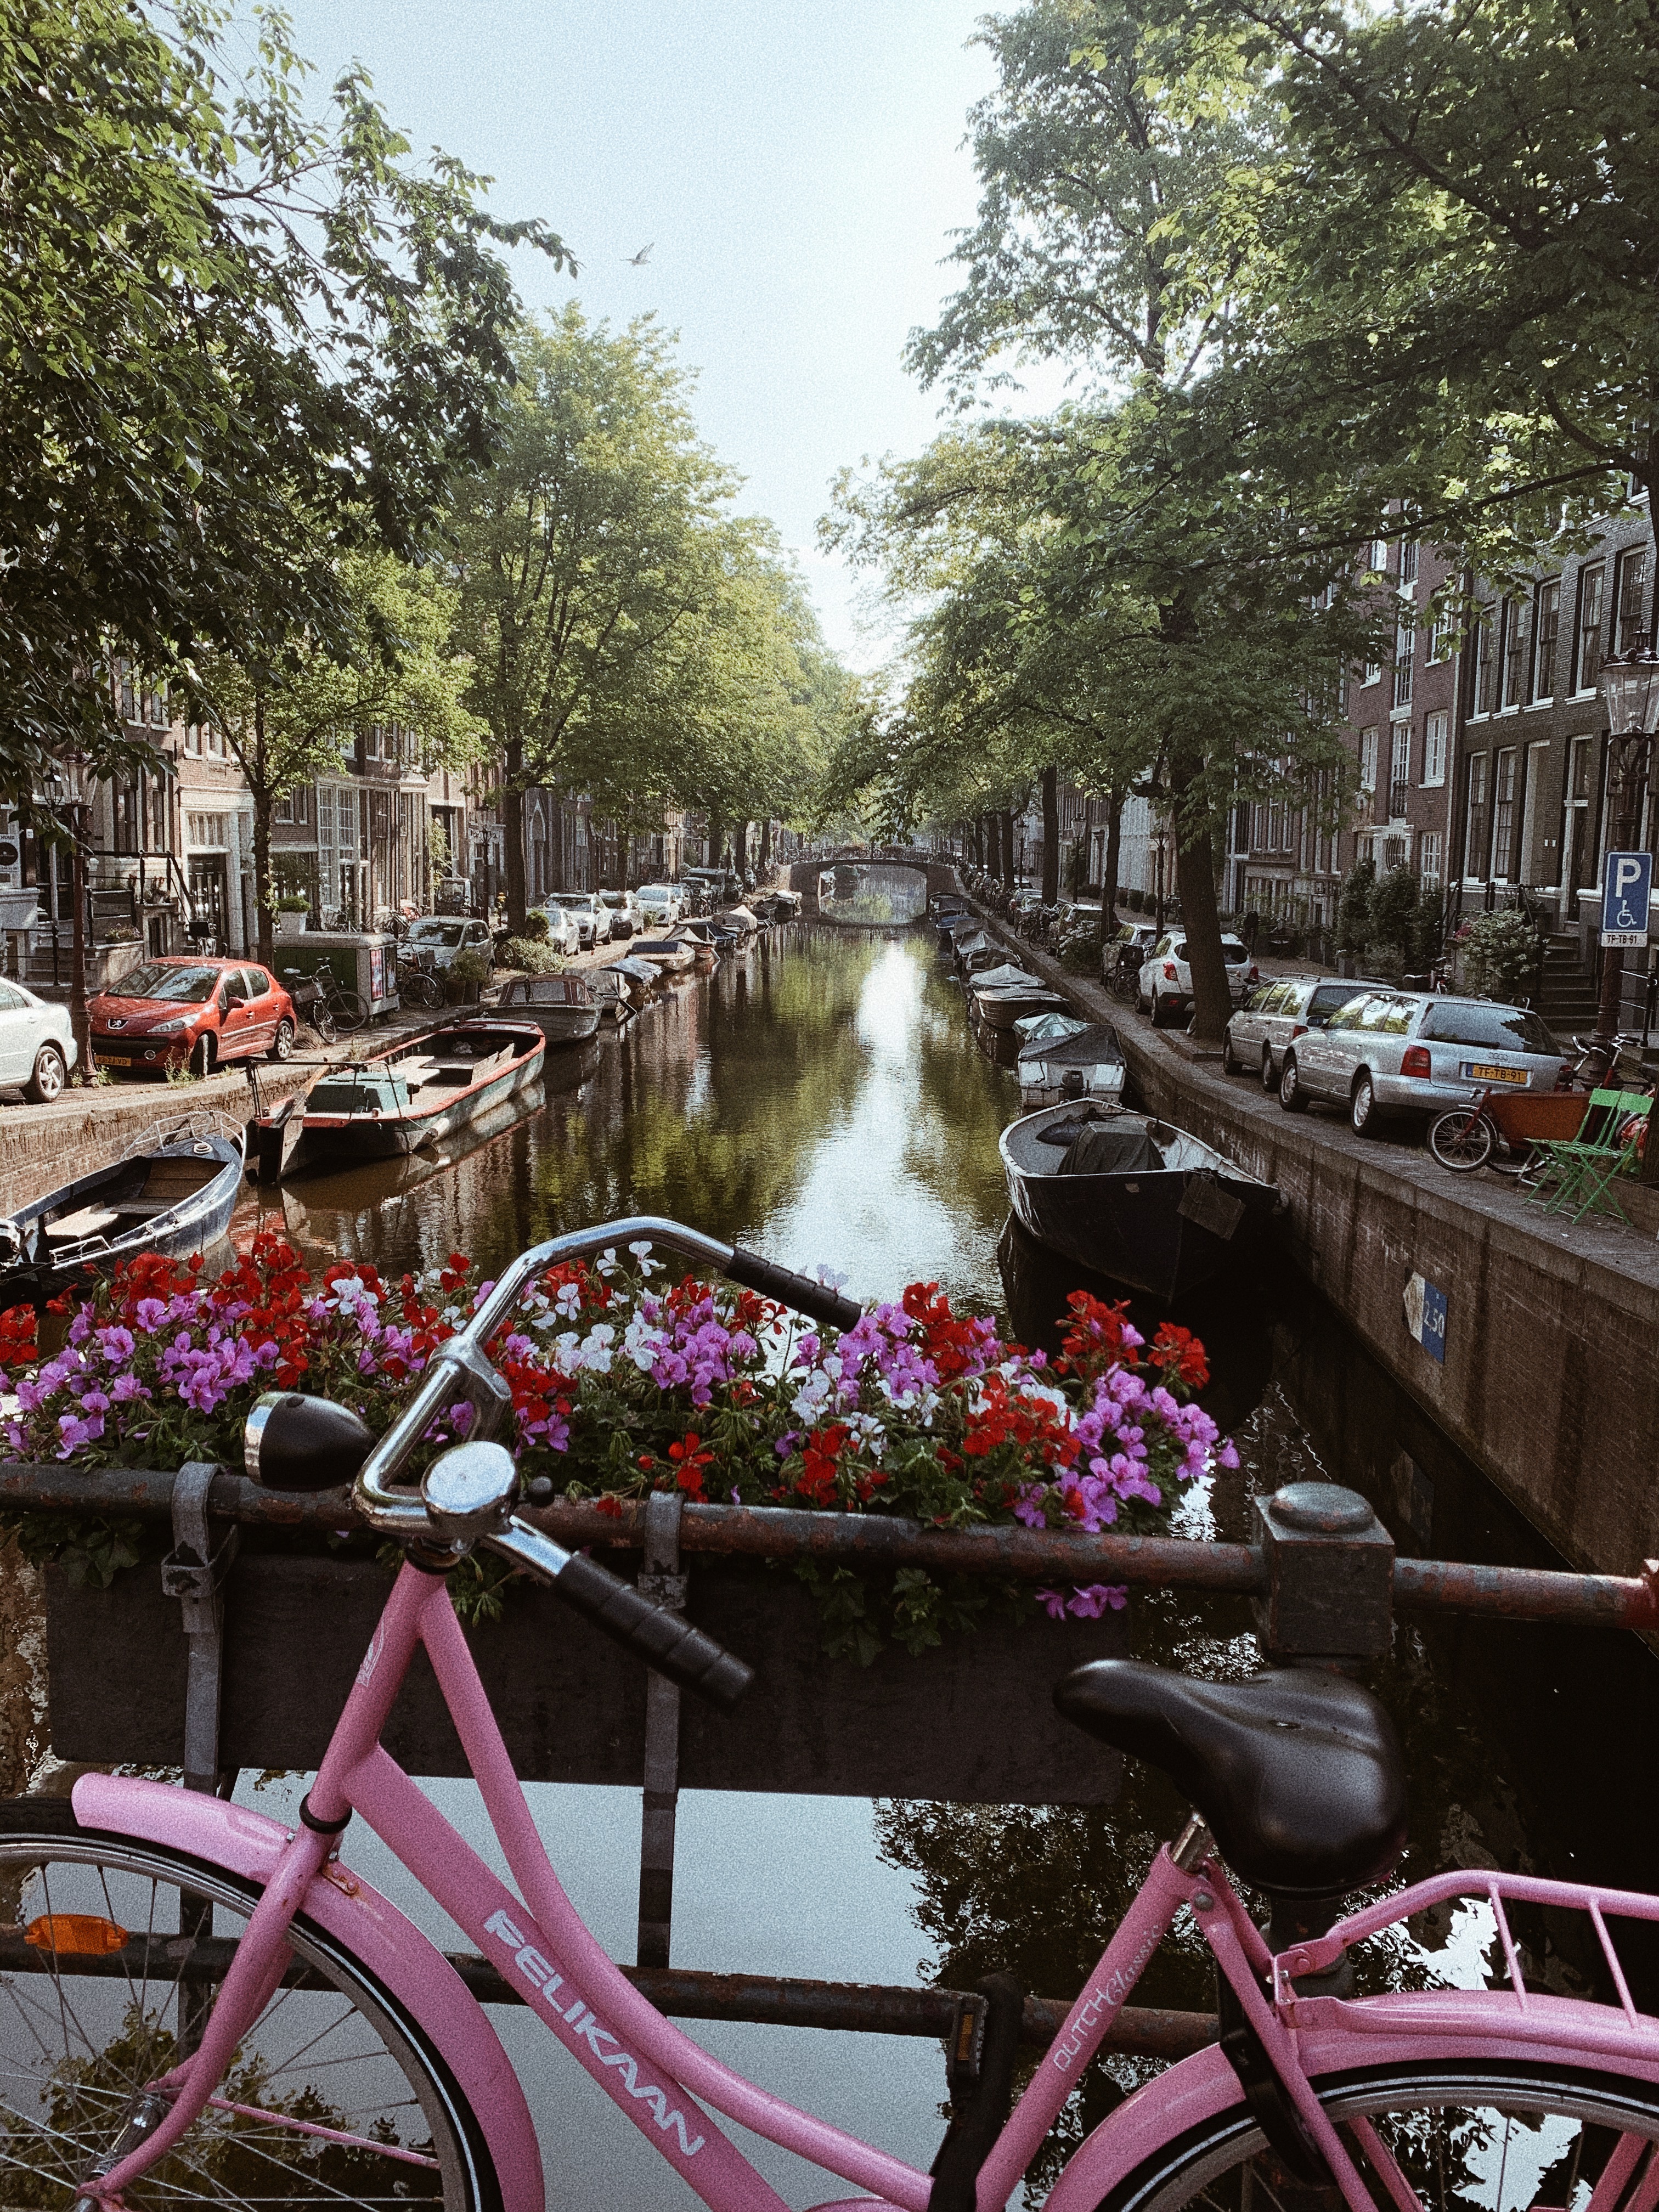 These 7 cultural activities are really Dutch